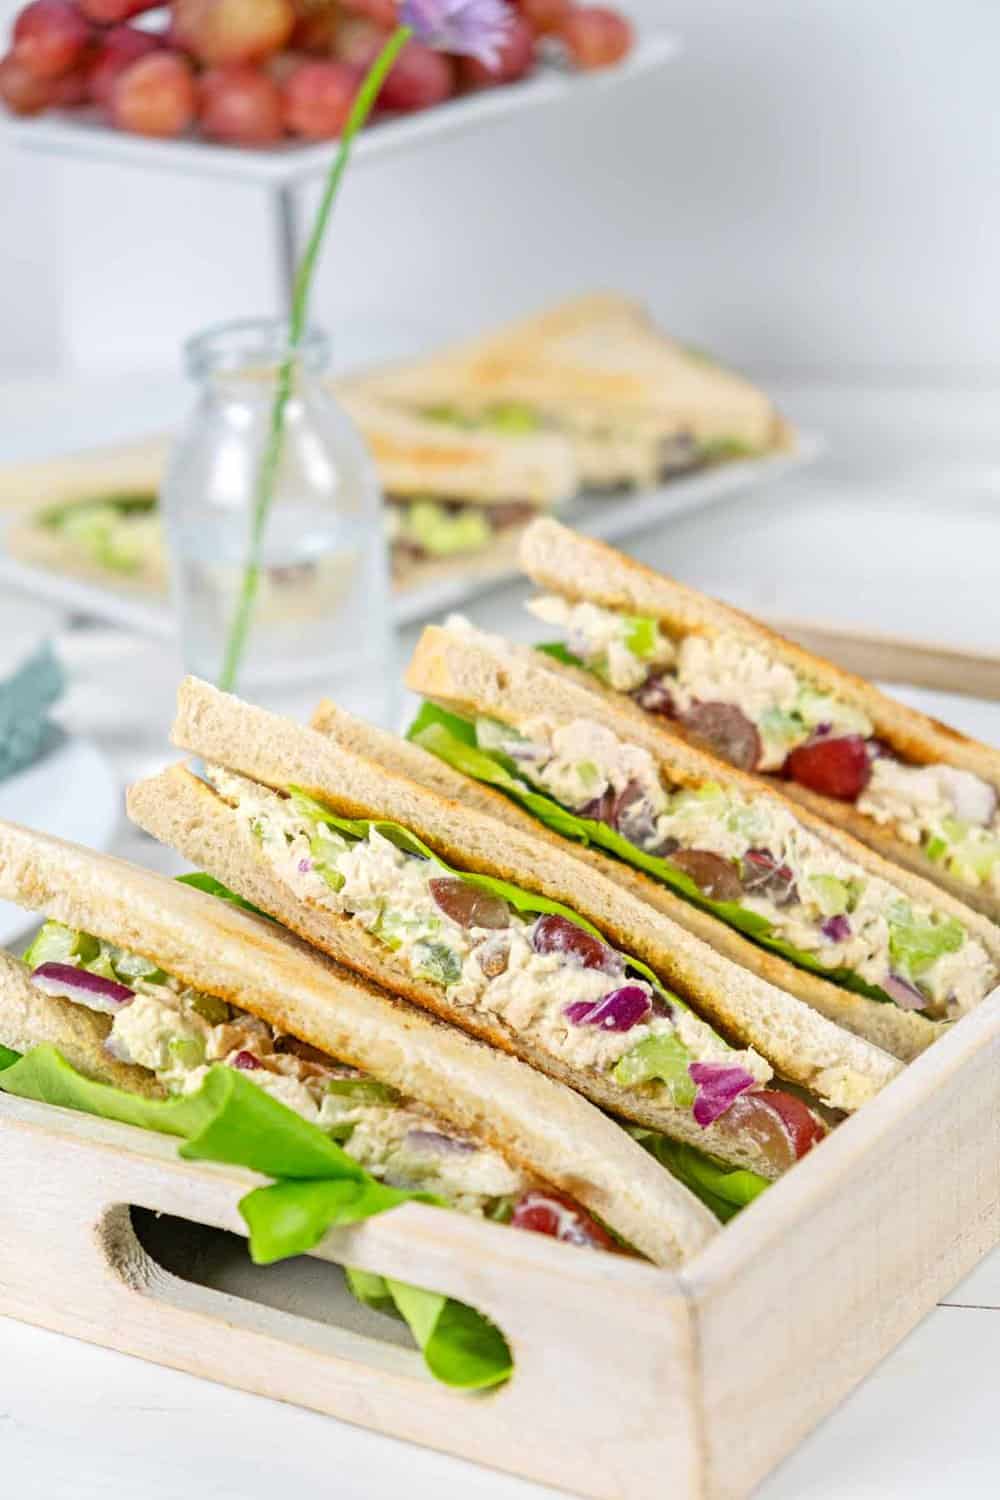 tray with chicken salad sandwiches with celery and grapes